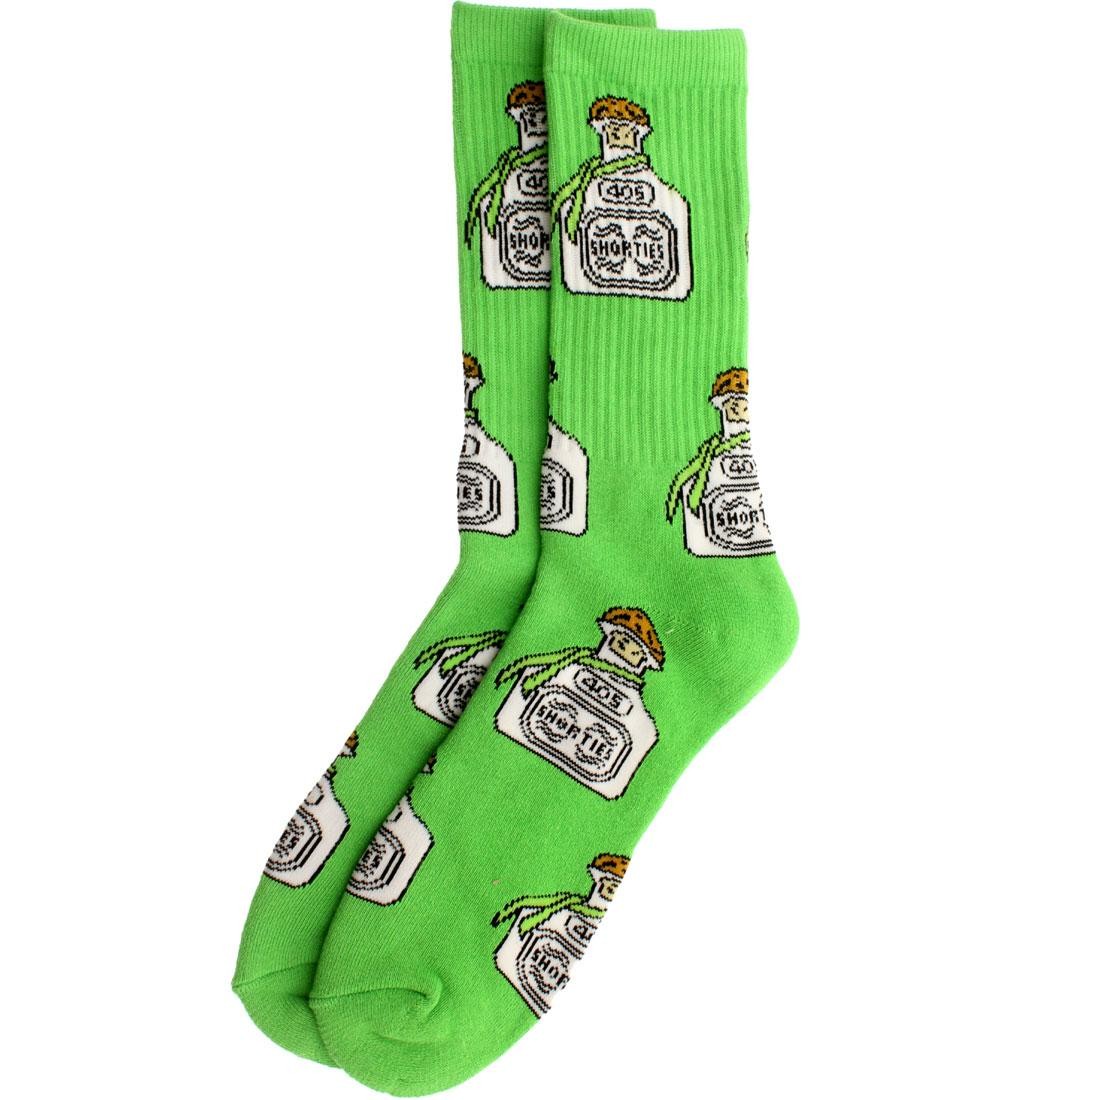 40s and Shorties Tequila Sock (green / light green) 1S